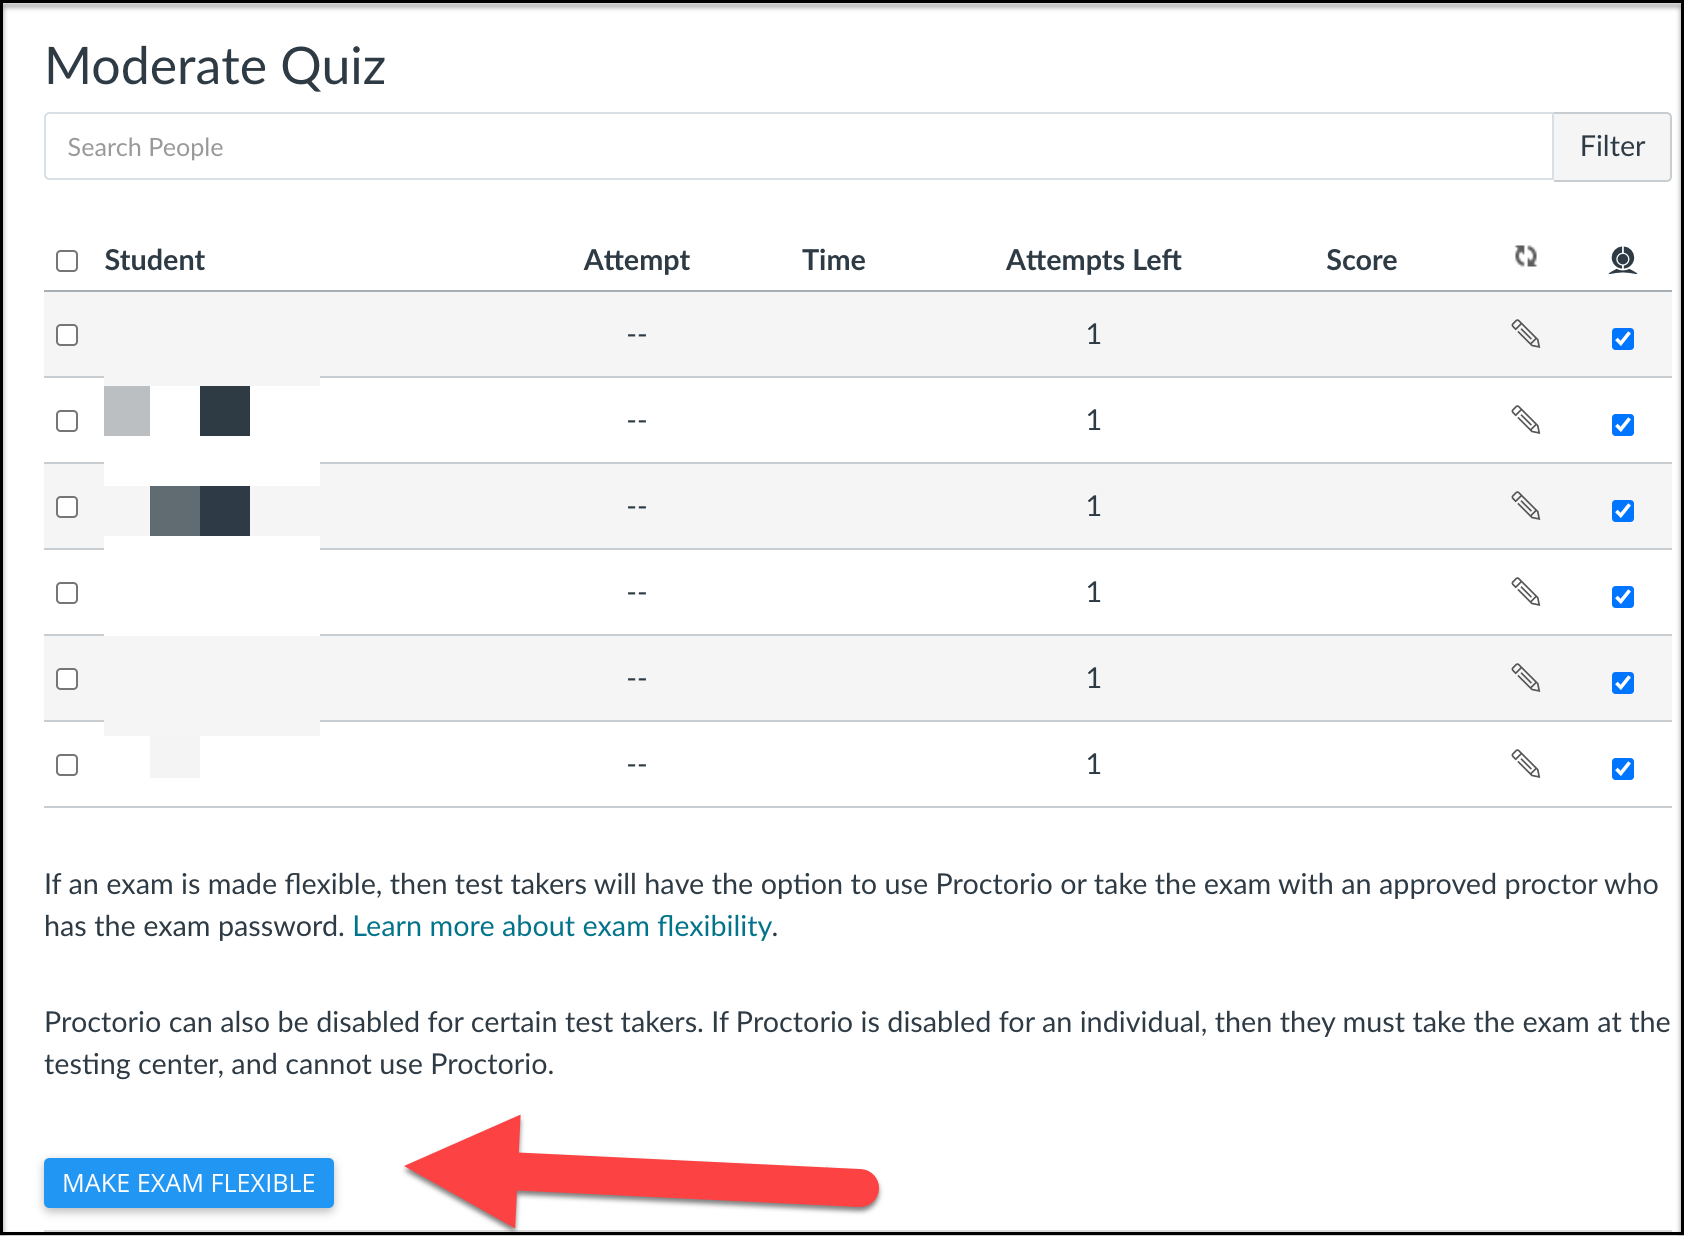 Screen capture showing the Moderate Quiz interface. Below the moderation area, there is a red arrow pointing at the 'Make Exam Flexible' button.